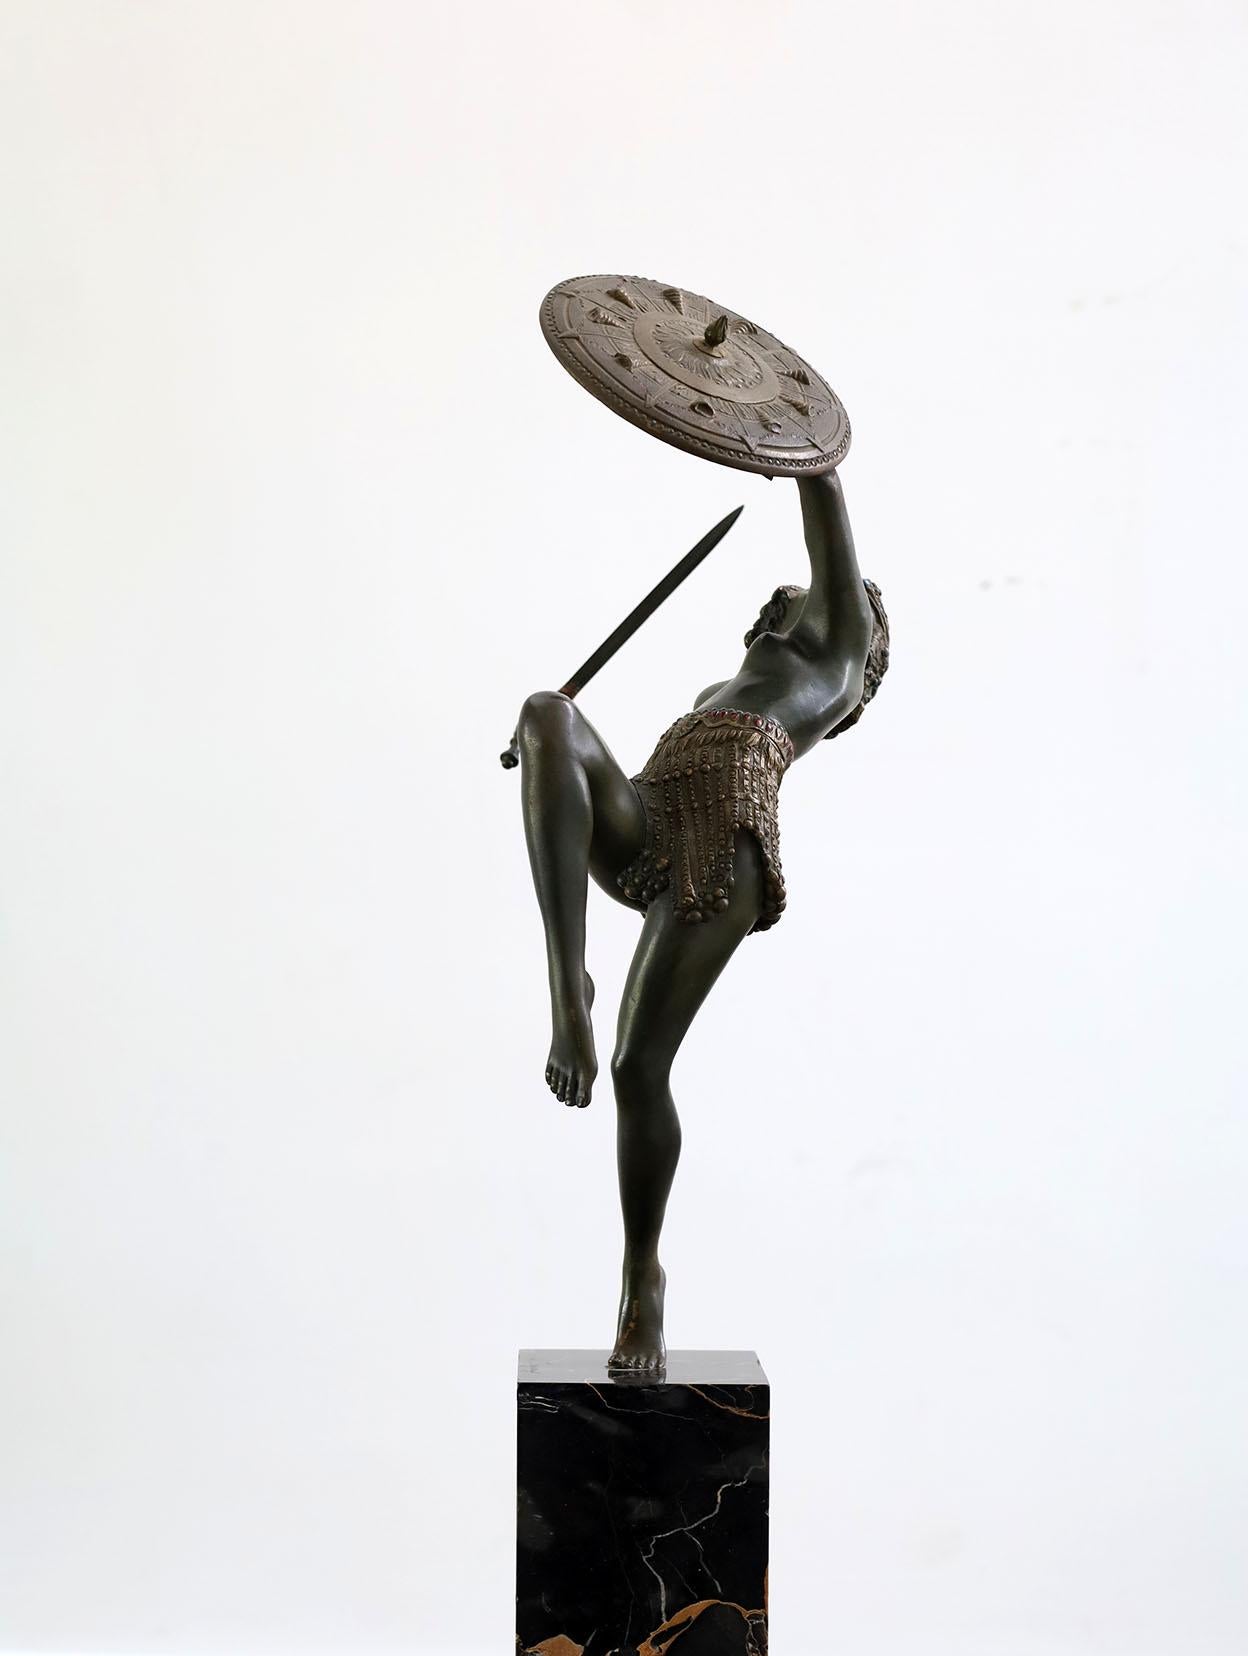 Art Deco bronze sculpture by French Artist Pierre Le Faguays, France 1930. Bronze on green marble base. This sculpture is illustrated in: Art Deco and other figures by Brian Catley, Antique collectors club.